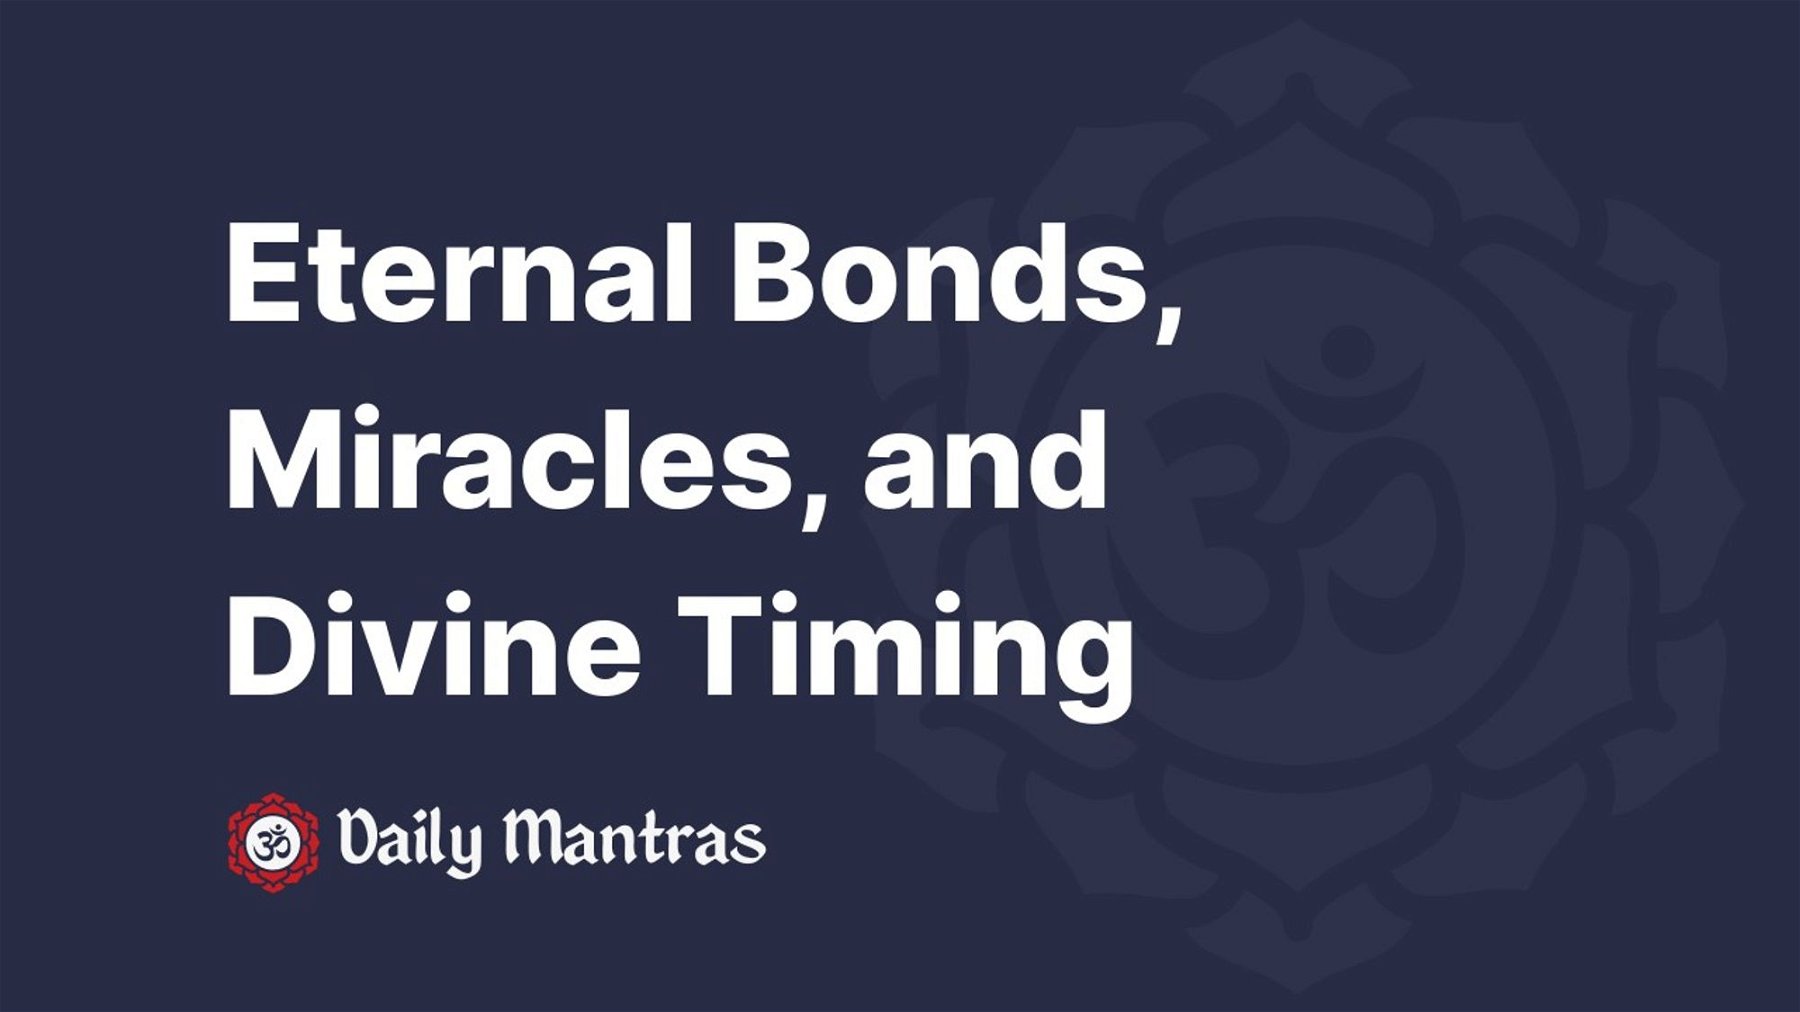 Eternal Bonds, Miracles, and Divine Timing